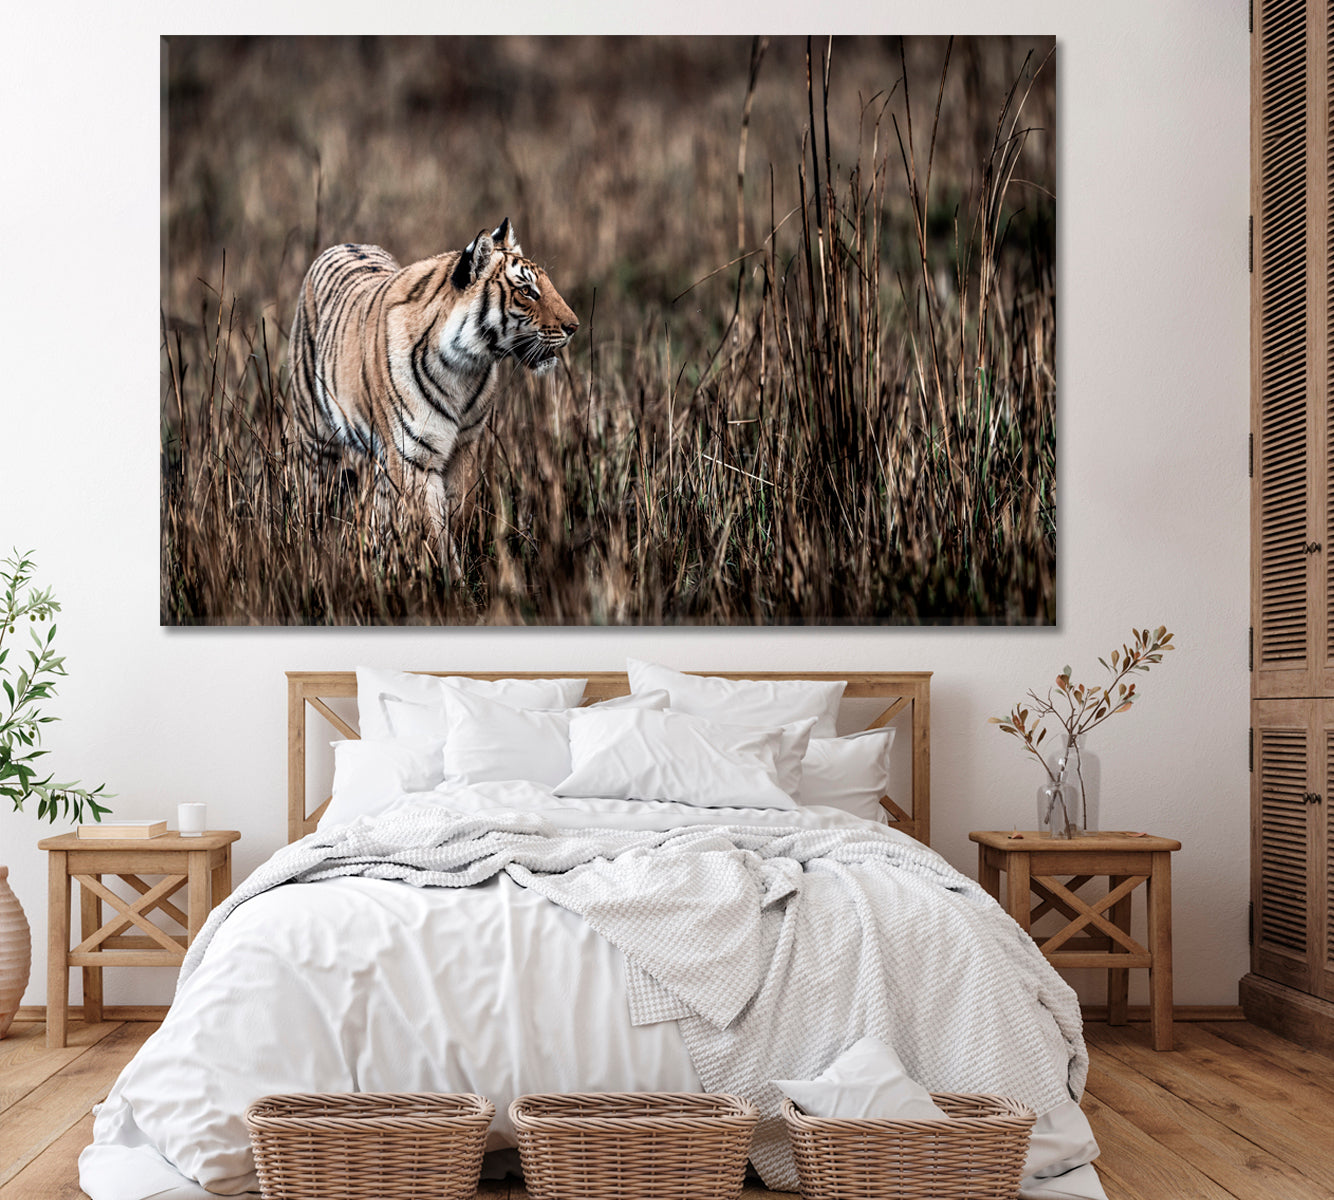 Tiger in Jim Corbett National Park India Canvas Print ArtLexy 1 Panel 24"x16" inches 